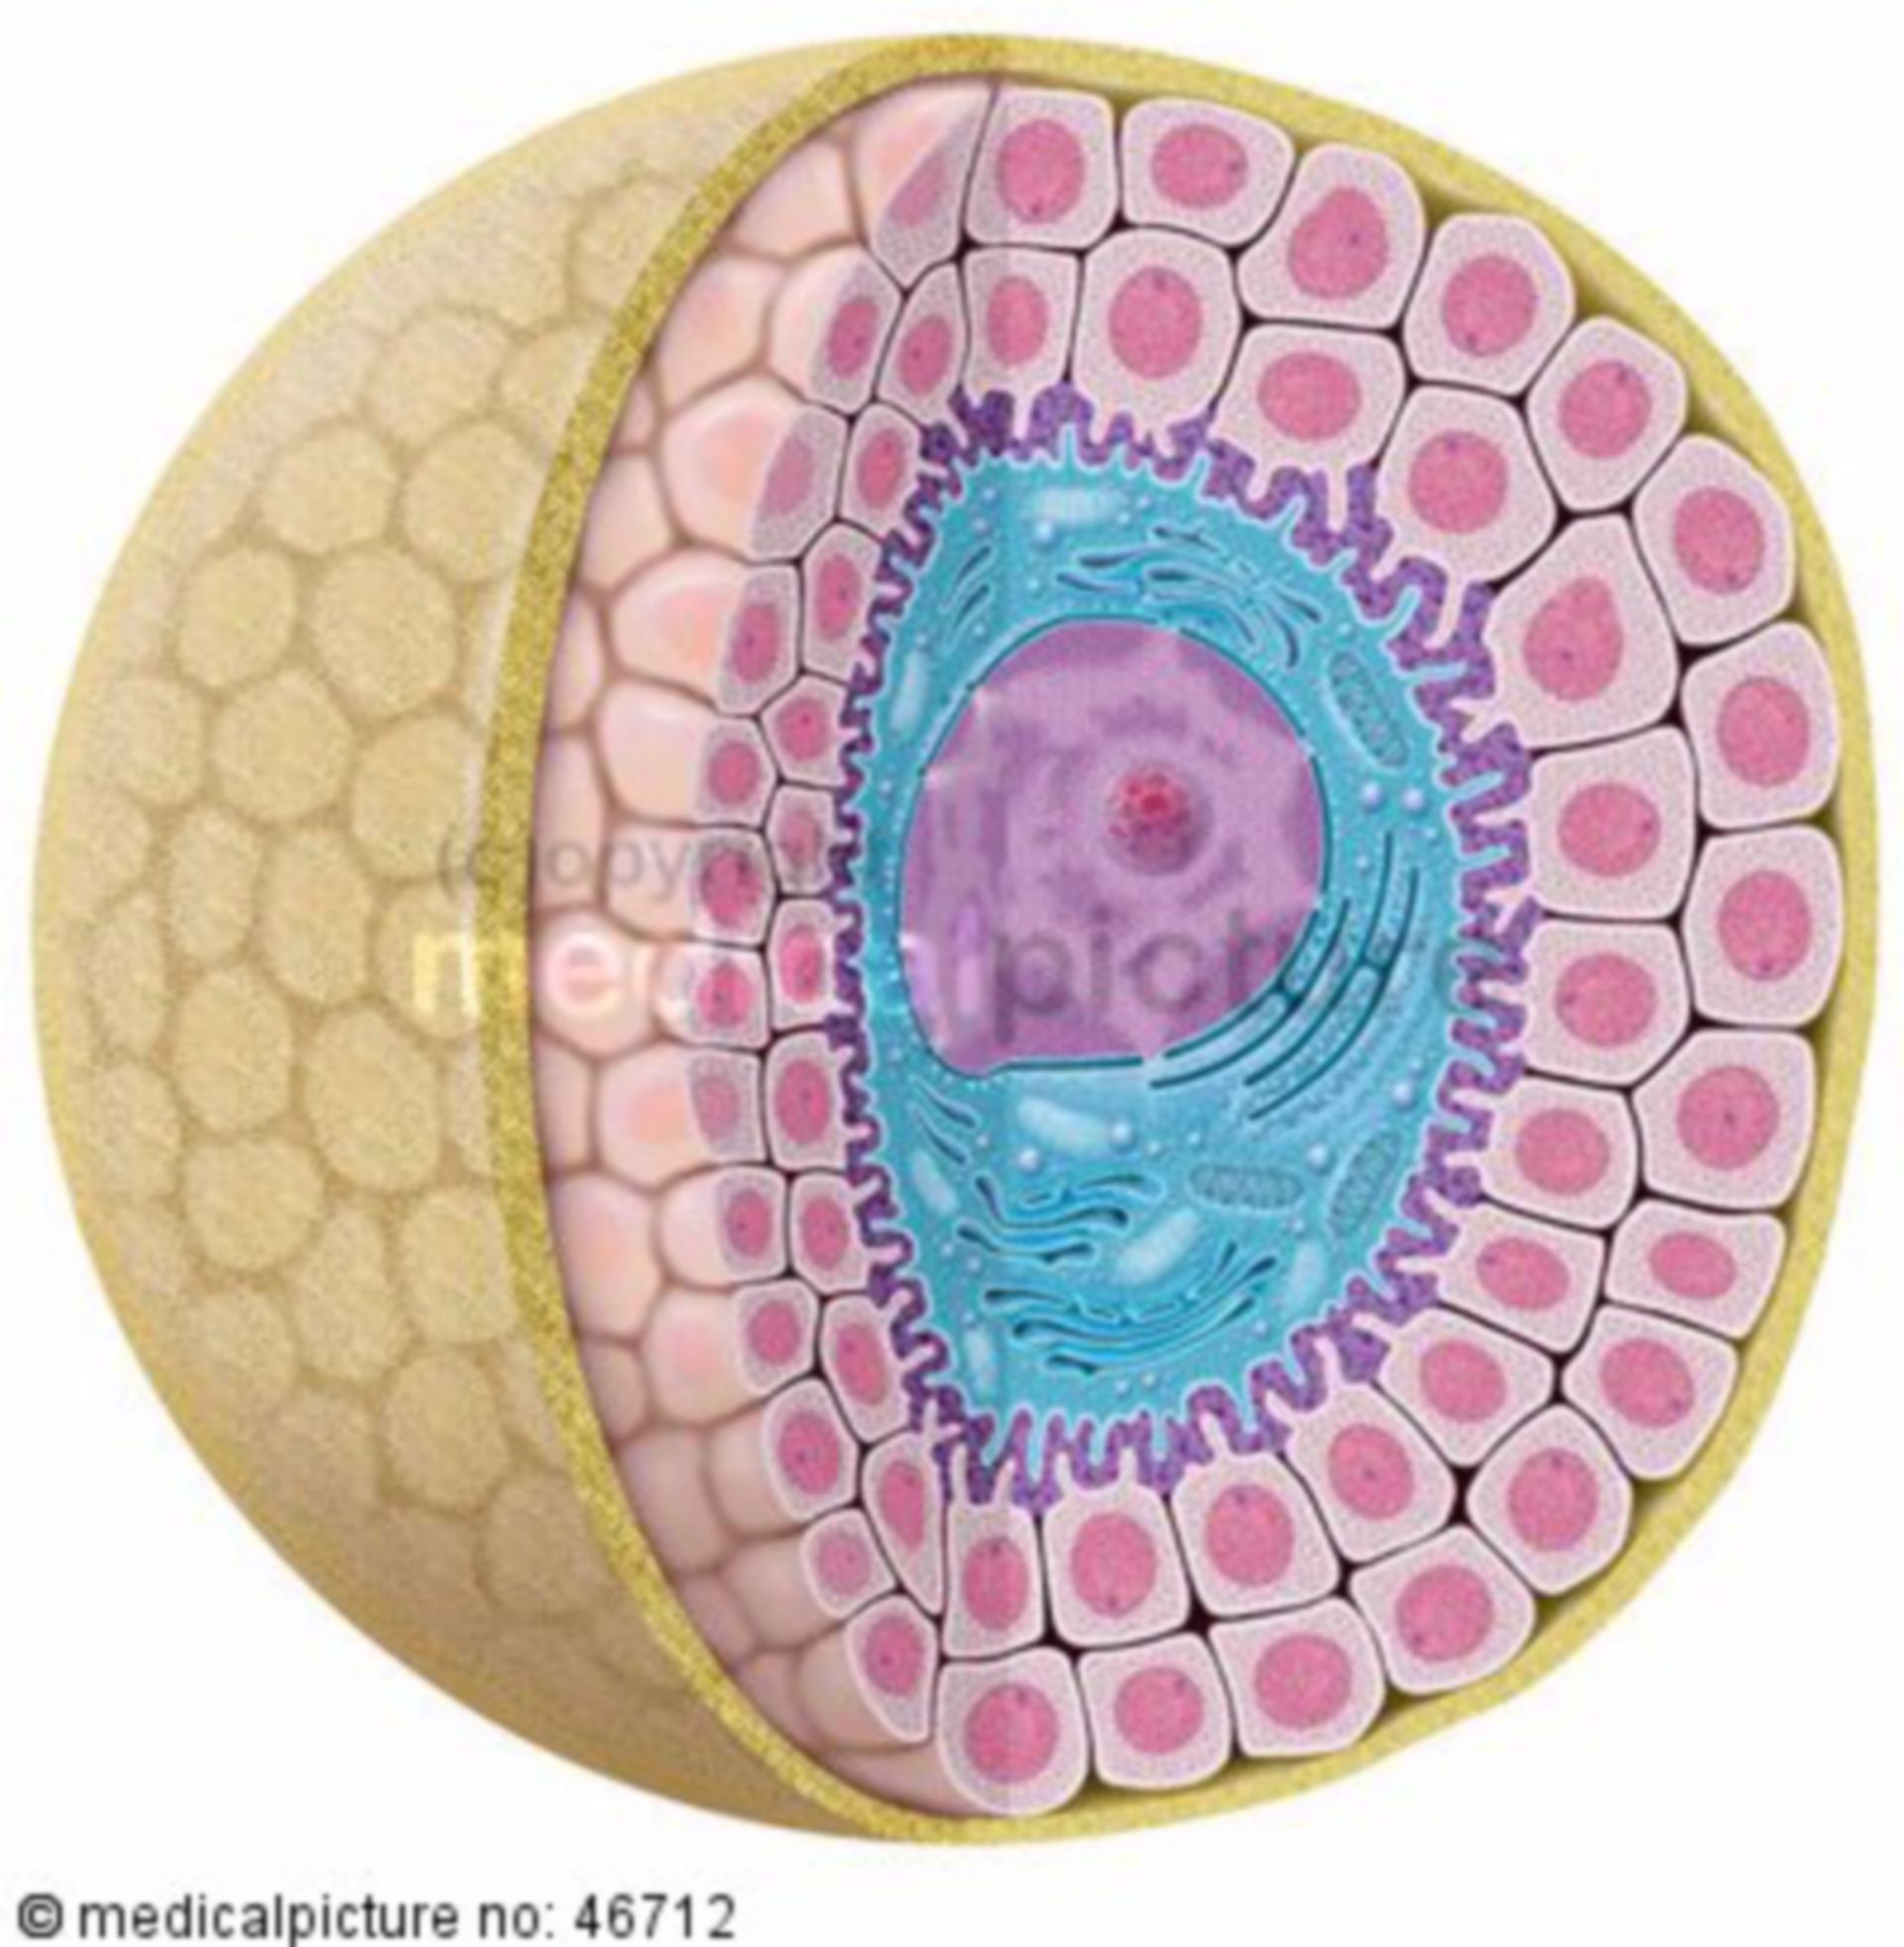 Secondary follicle, human egg cell